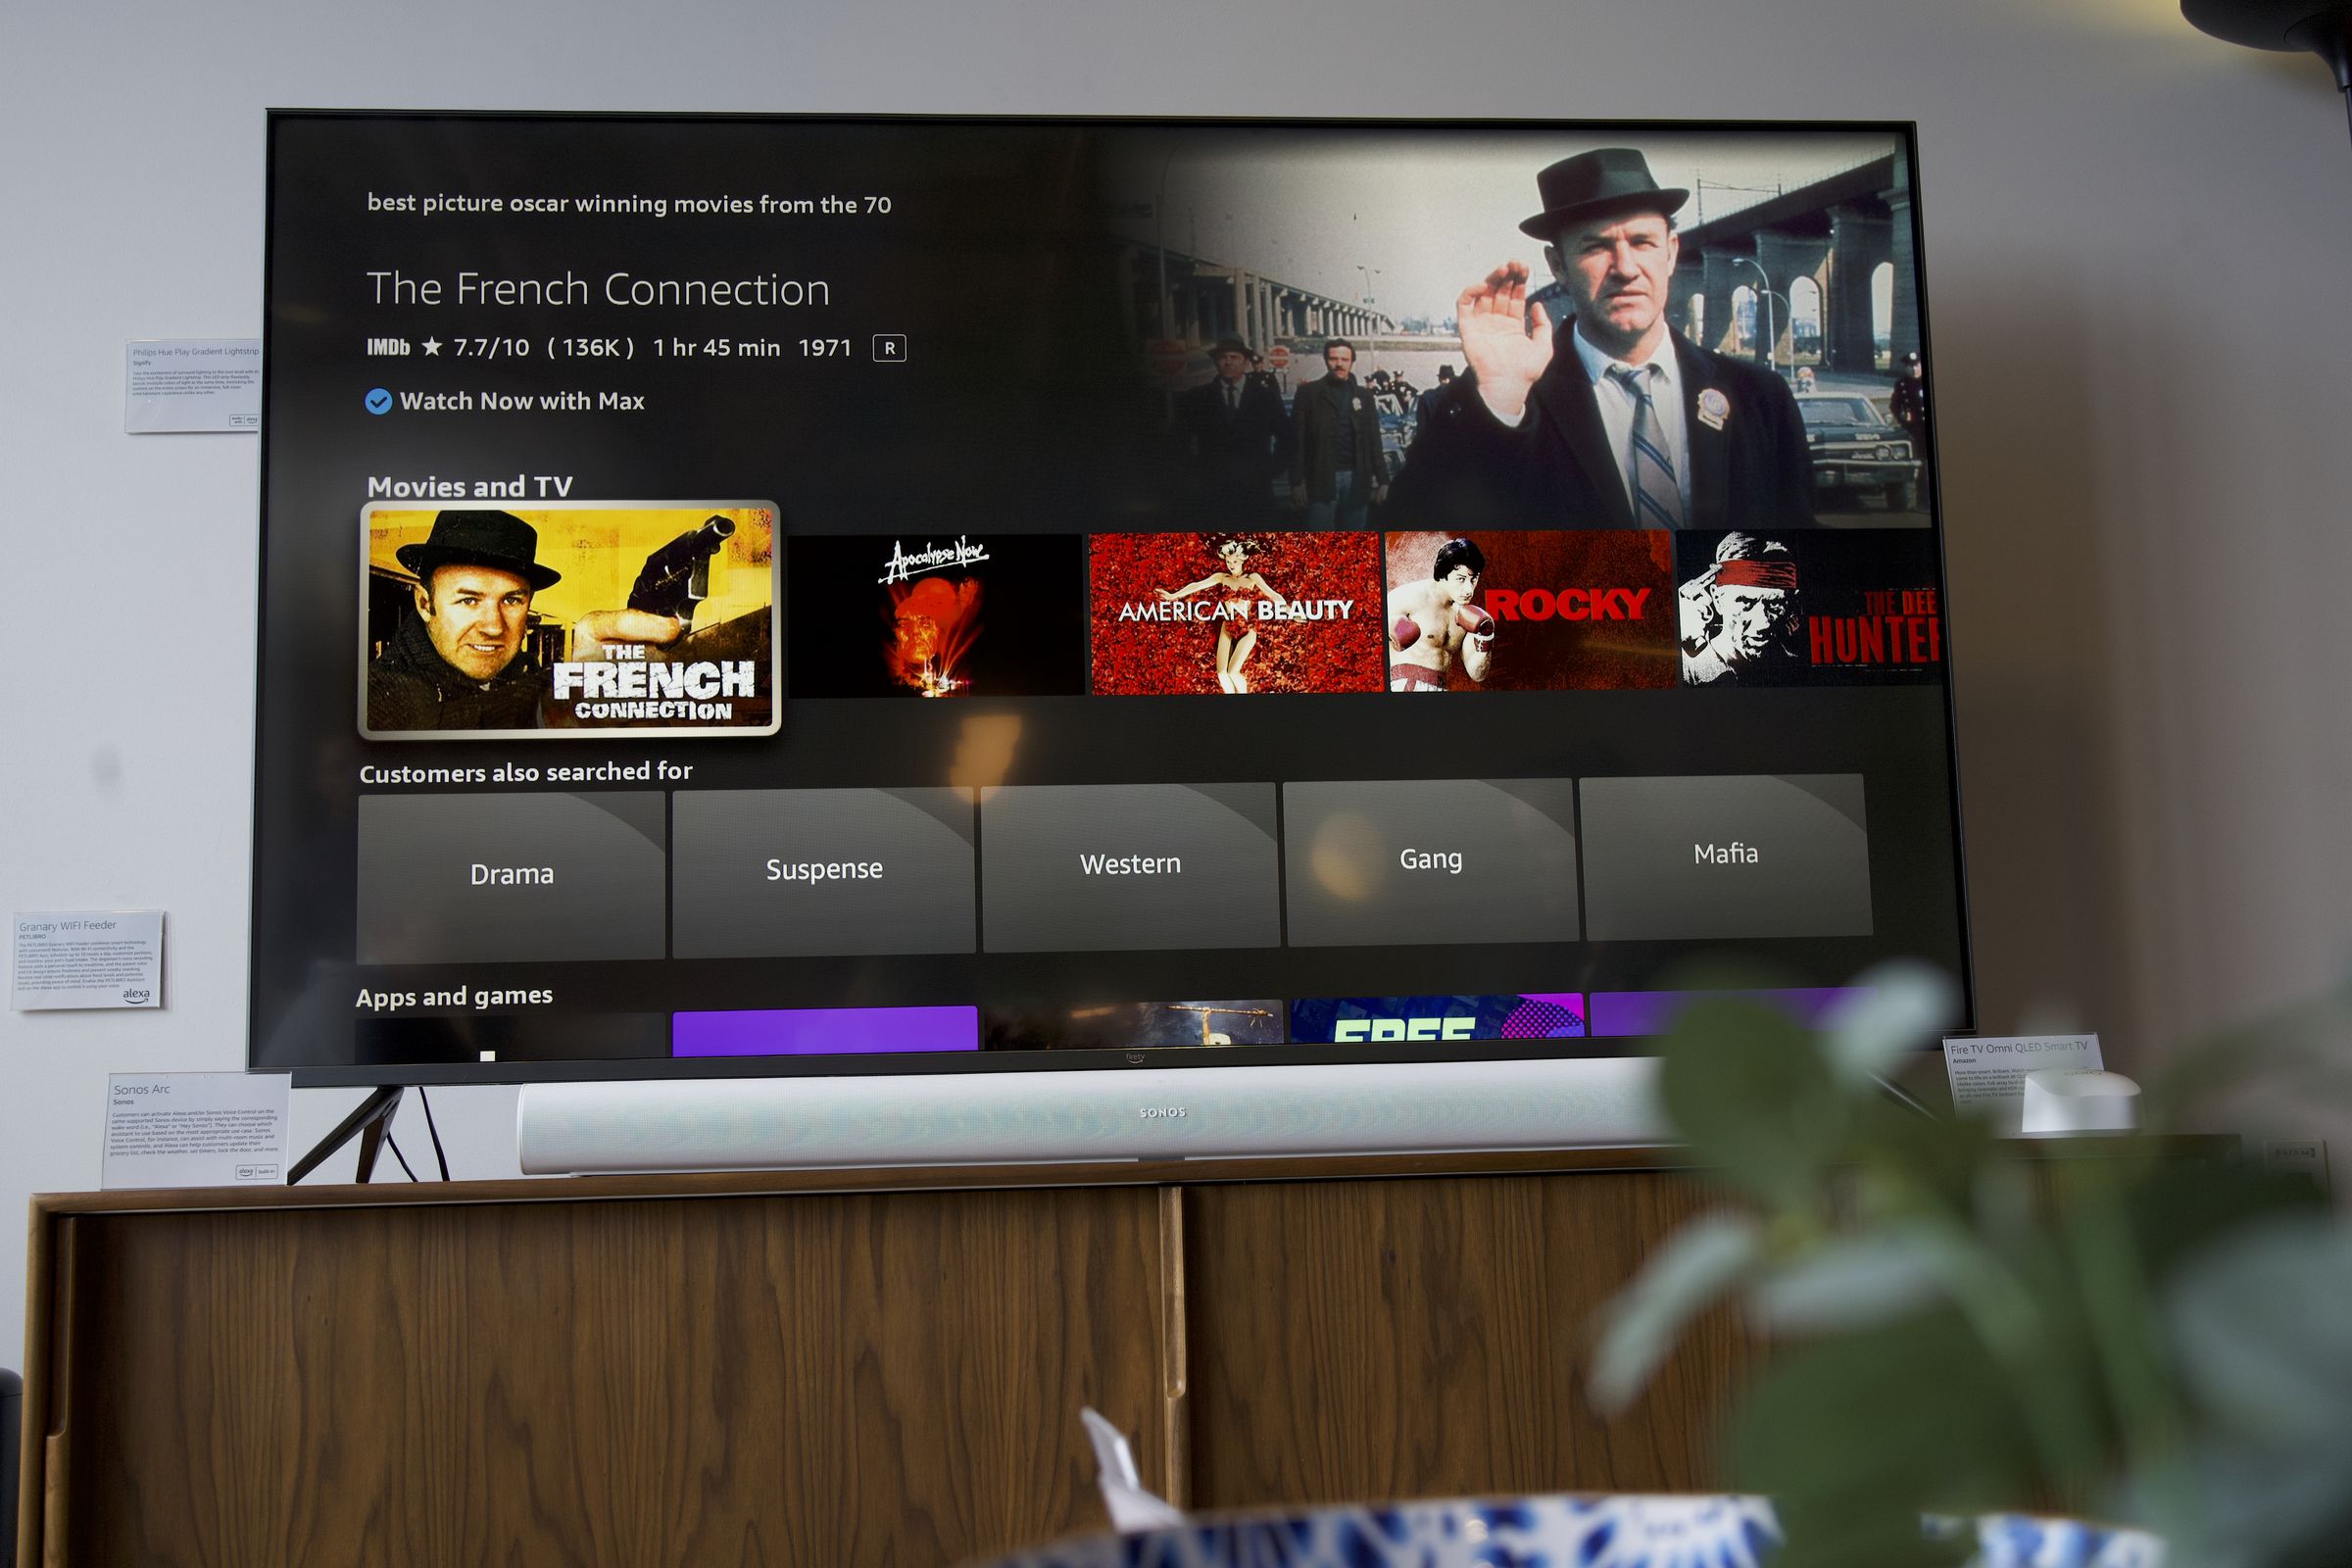 The new AI-powered search from Amazon for Fire TVs lets Alexa help you more easily find what you want to watch.